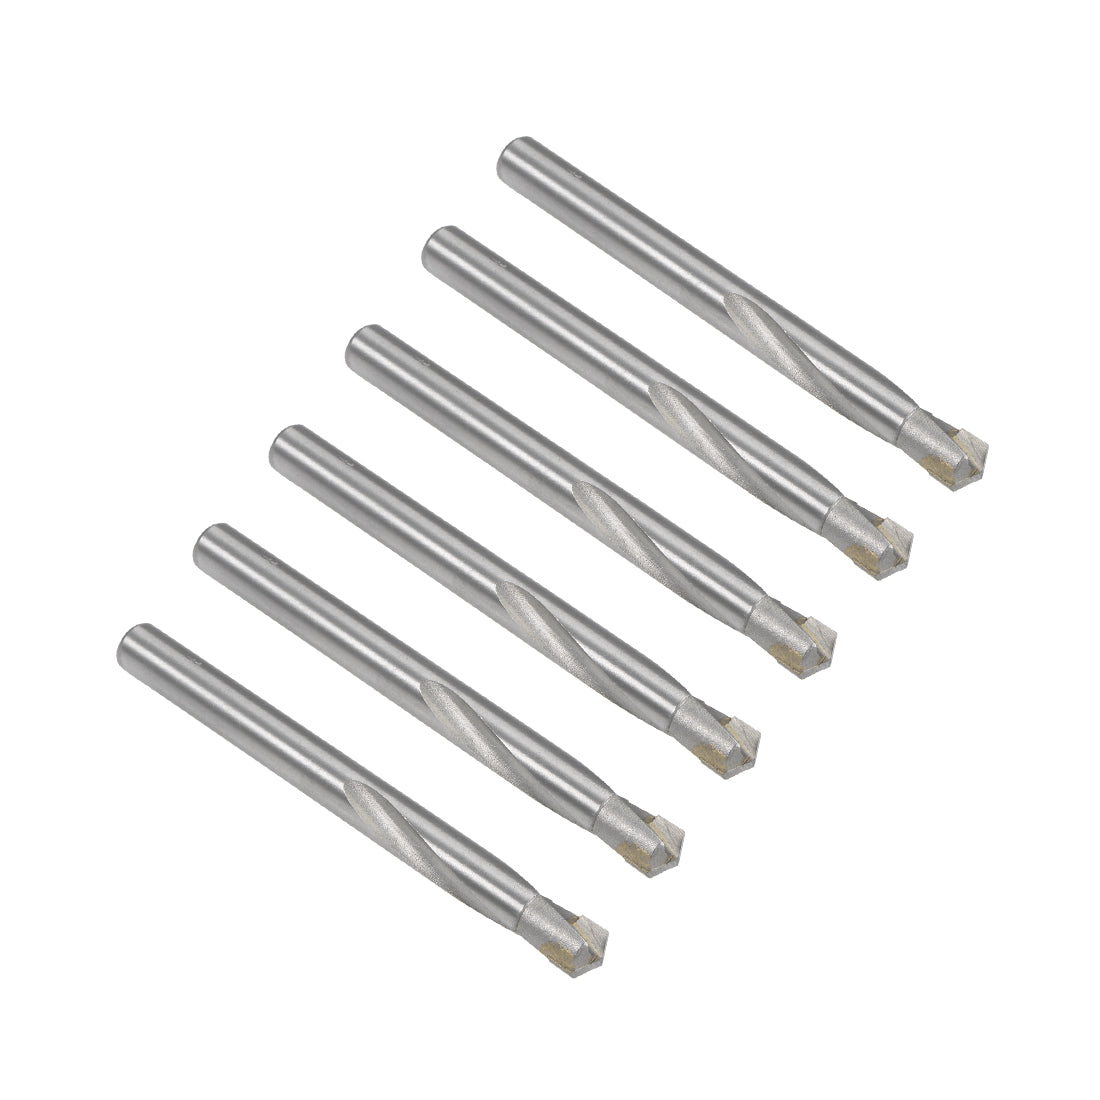 uxcell Uxcell 9mm Cemented Carbide Twist Drill Bits for Stainless Steel Copper Aluminum 6 Pcs